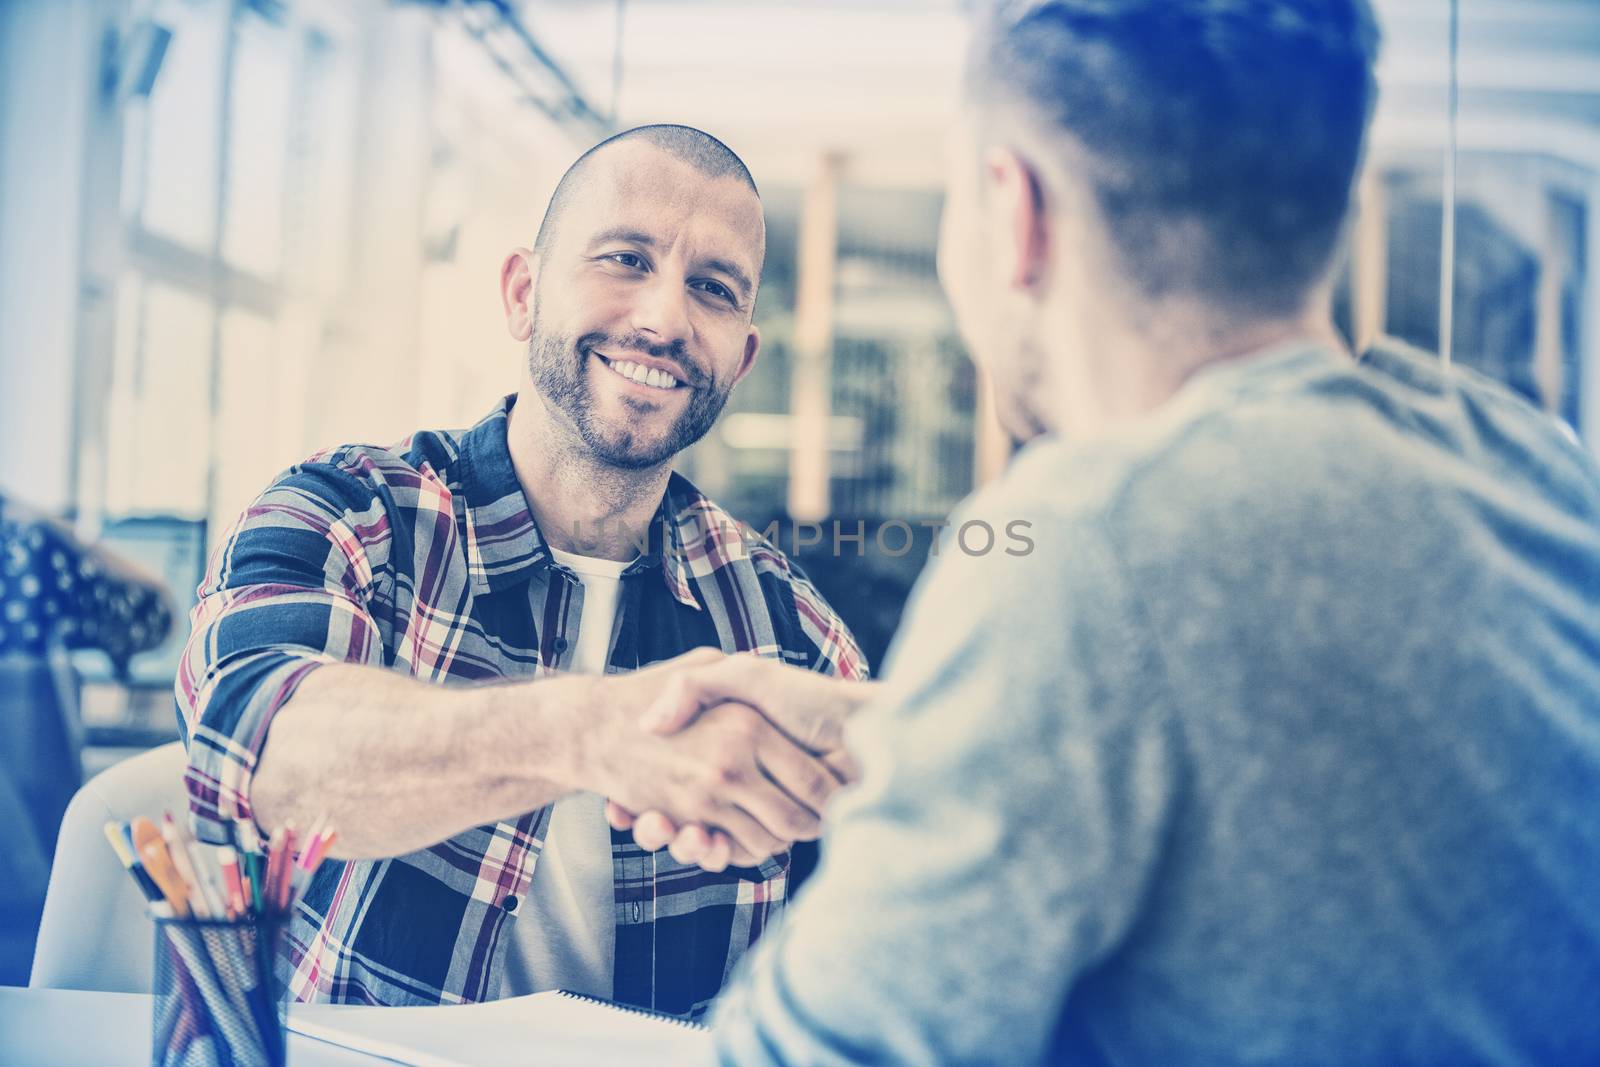 Confident business people shaking hands in creative office